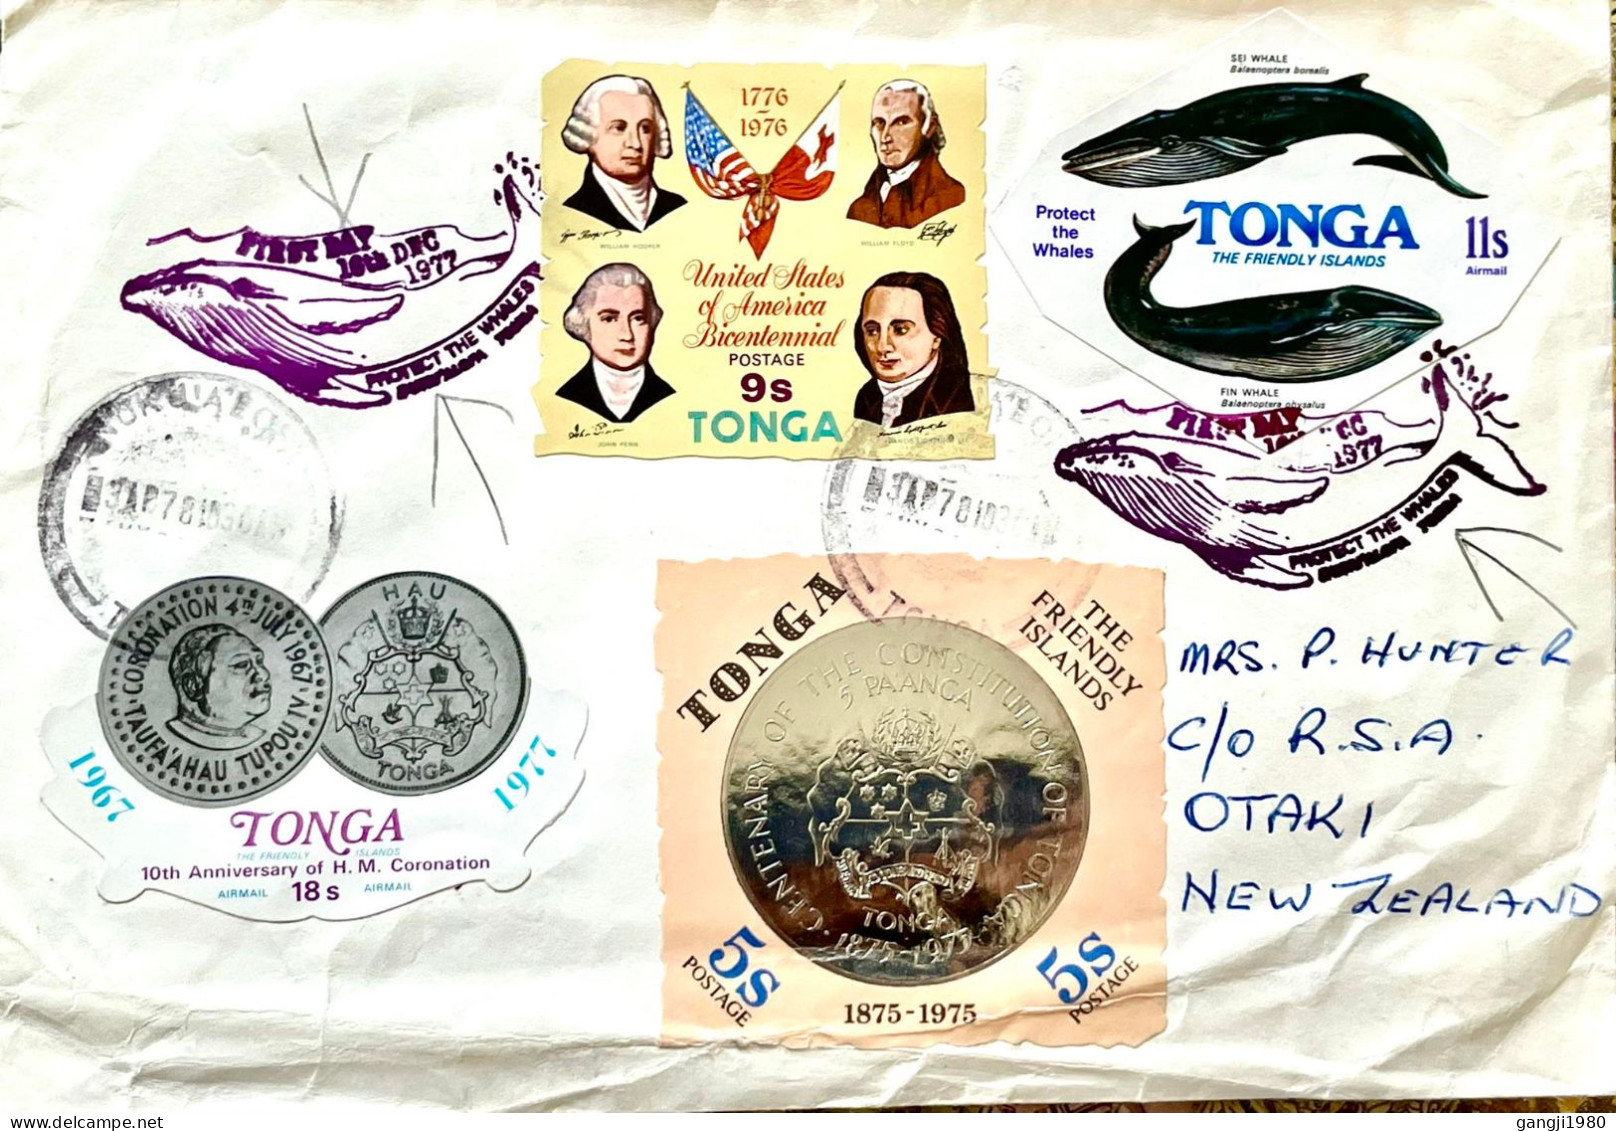 TONGA TO NEW ZEALAND 1978, COVER USED, PROTECT WHALES PICTURE CACHET, 4 DIFF ODD SHAPE STAMP, CORONATION 1976 USA BICENT - Tonga (1970-...)